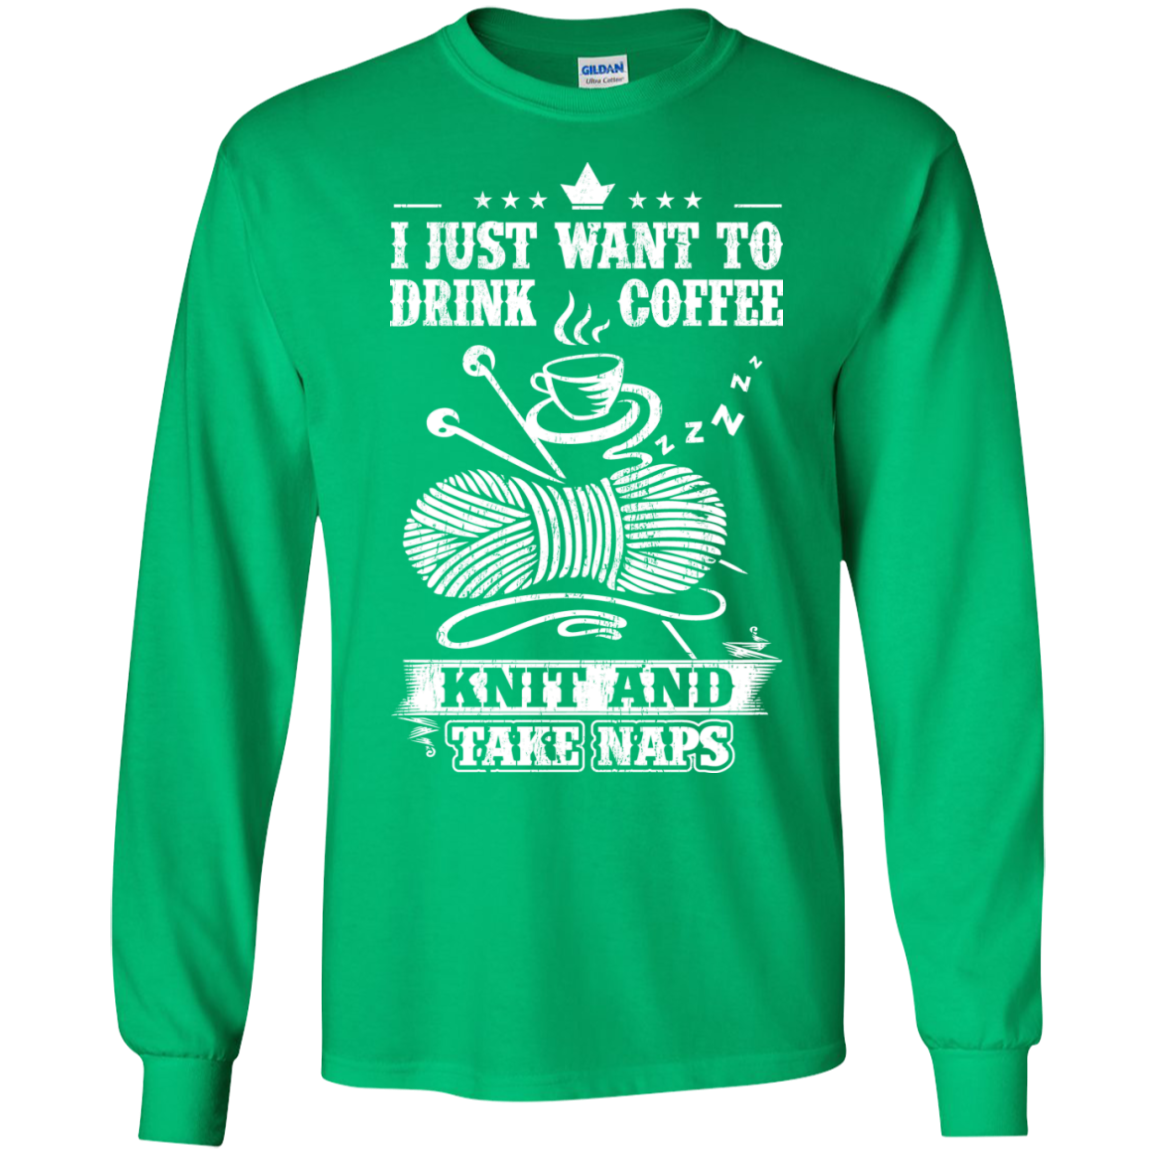 Coffee-Knit-Nap Long Sleeve Ultra Cotton T-Shirt - Crafter4Life - 1